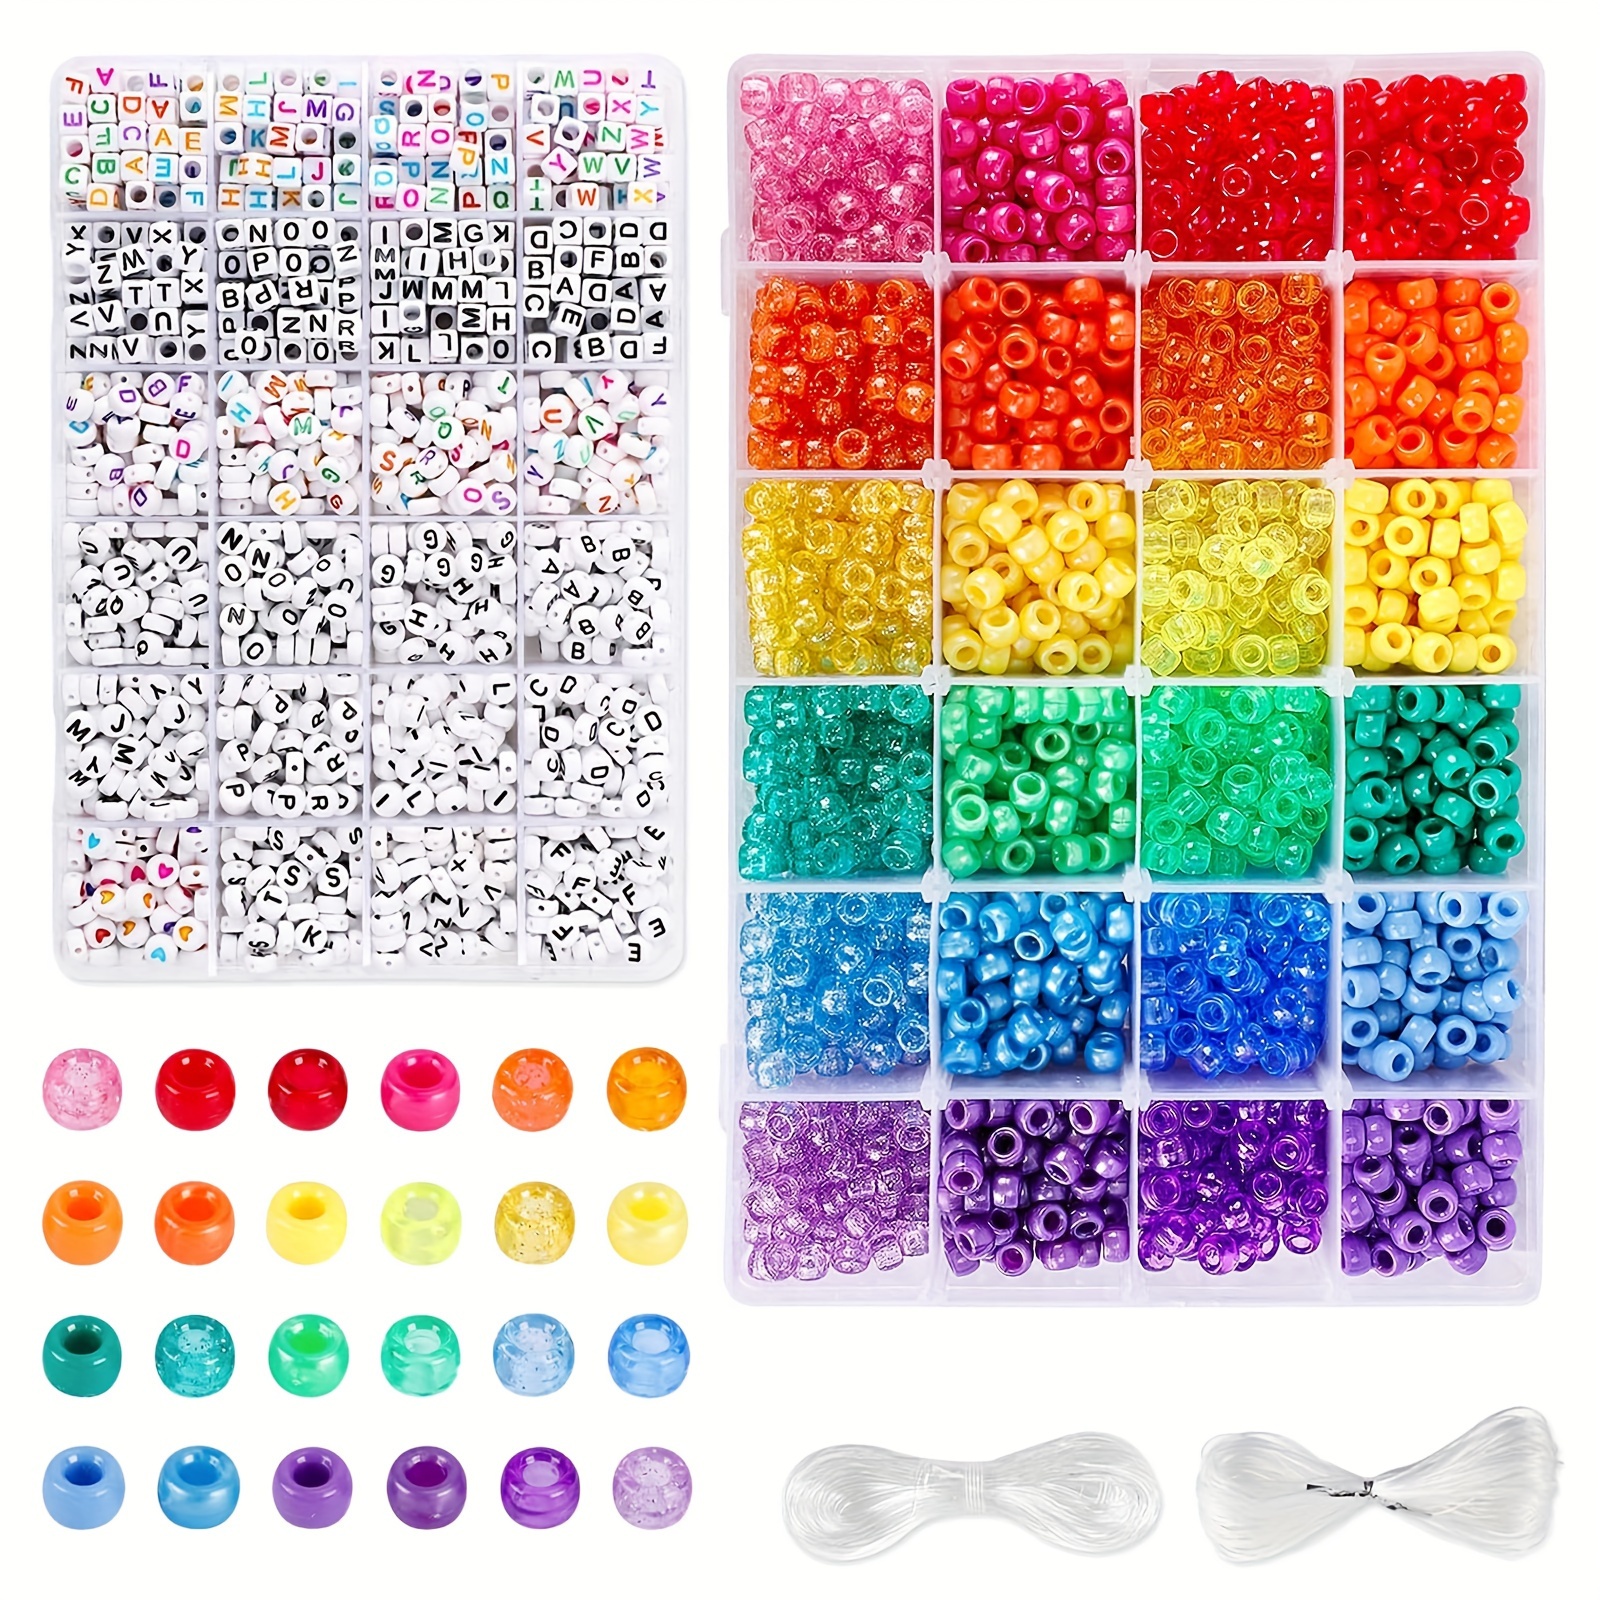 

4000pcs Beads Kit, 2400pcs Rainbow And 1600pcs Letter Beads, 24 Colors Plastic Craft Beads Bulk For Bracelets Jewelry Making With 20m Crystal String And 30m Elastic String